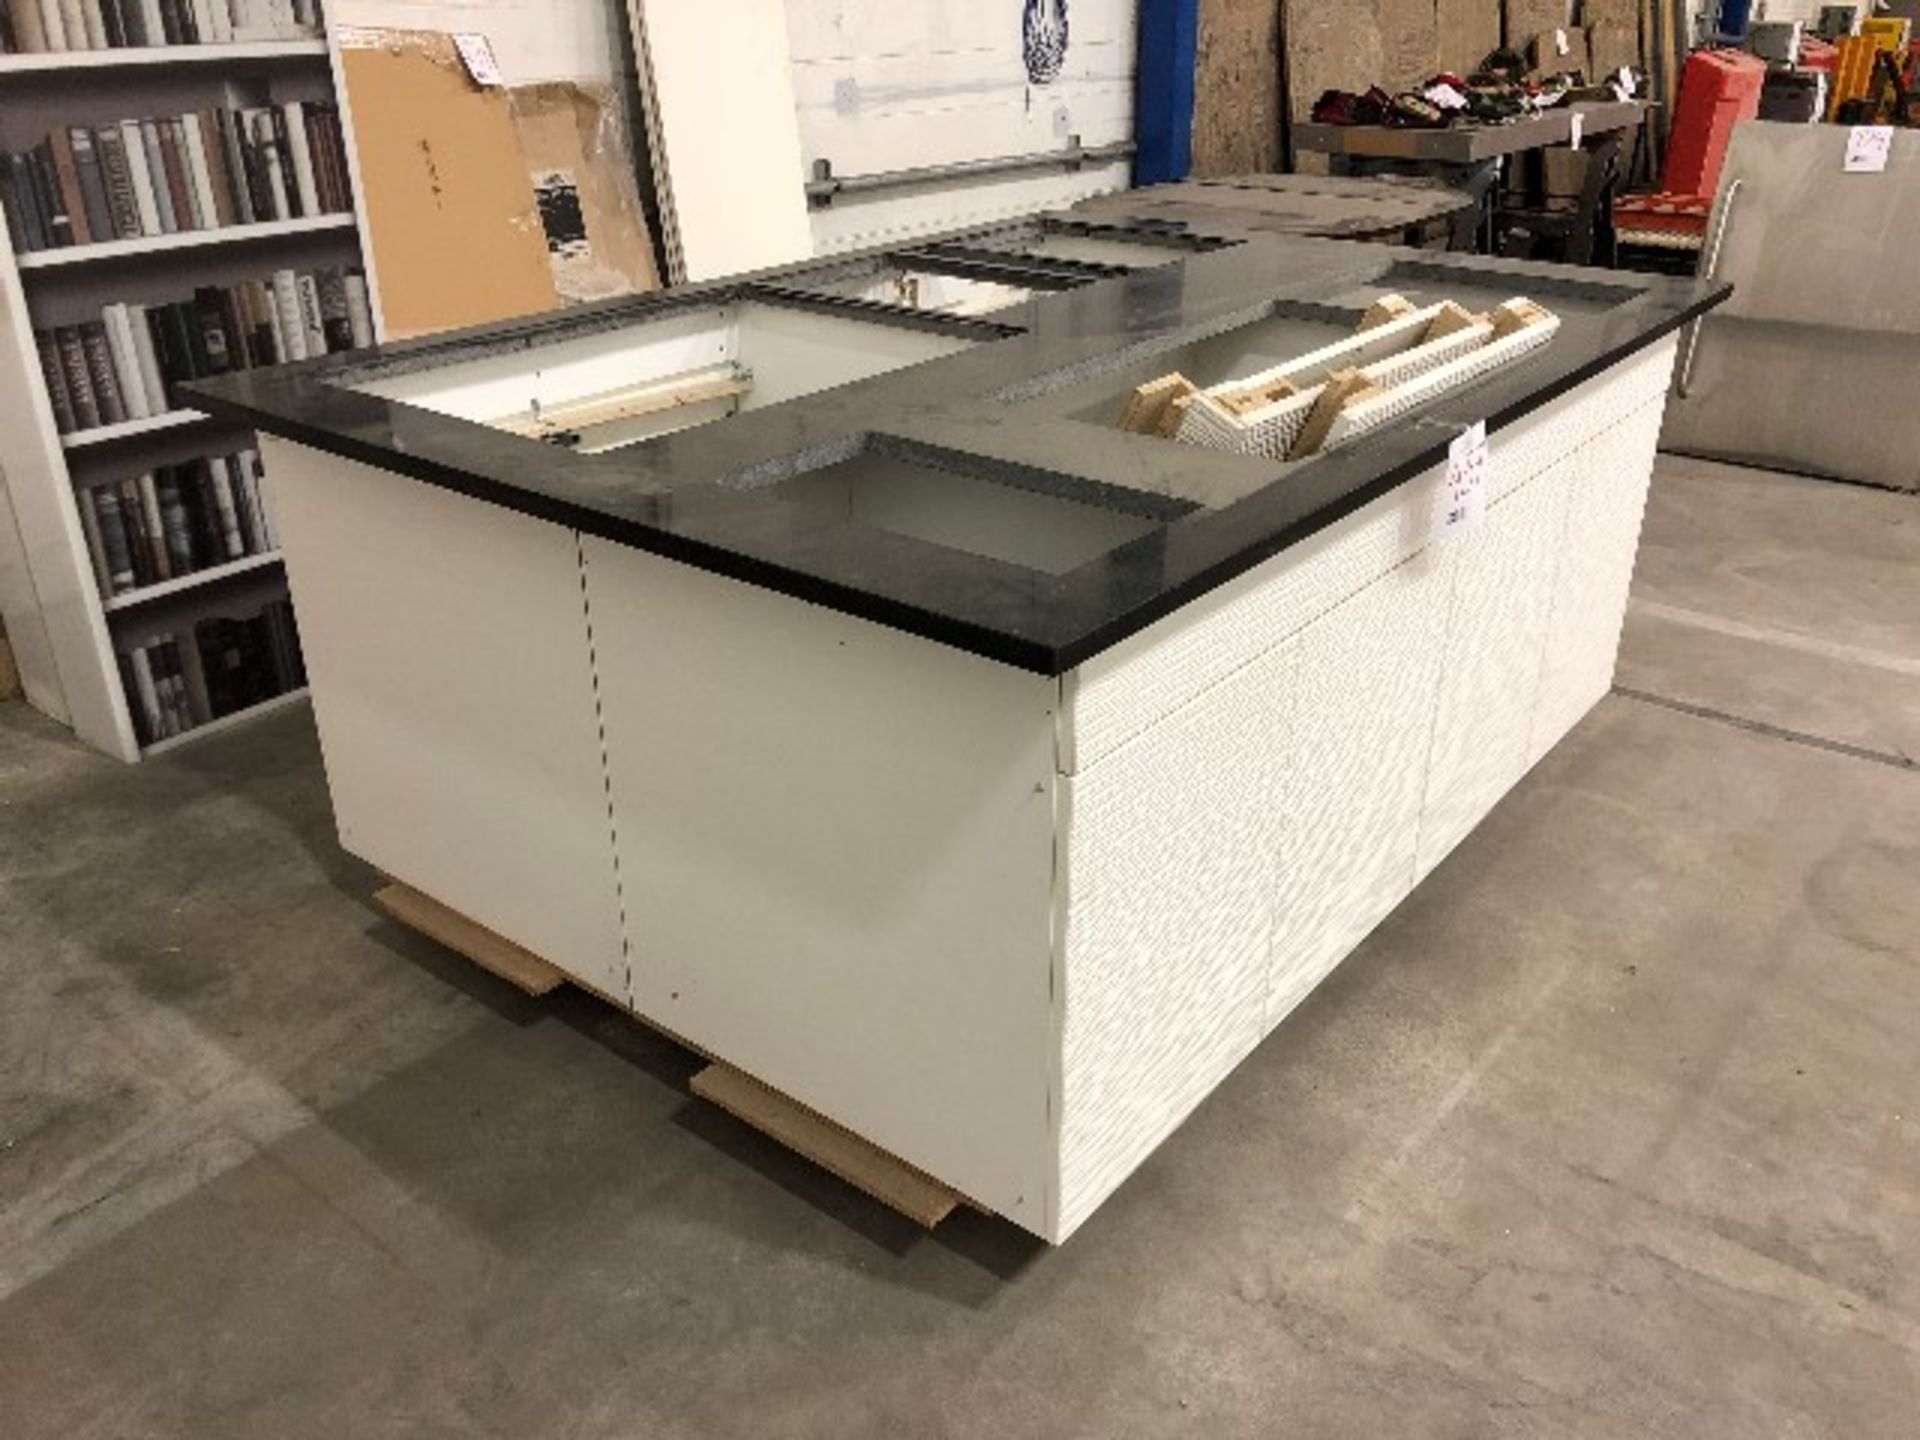 Mobile countertop cabinet - Image 2 of 2